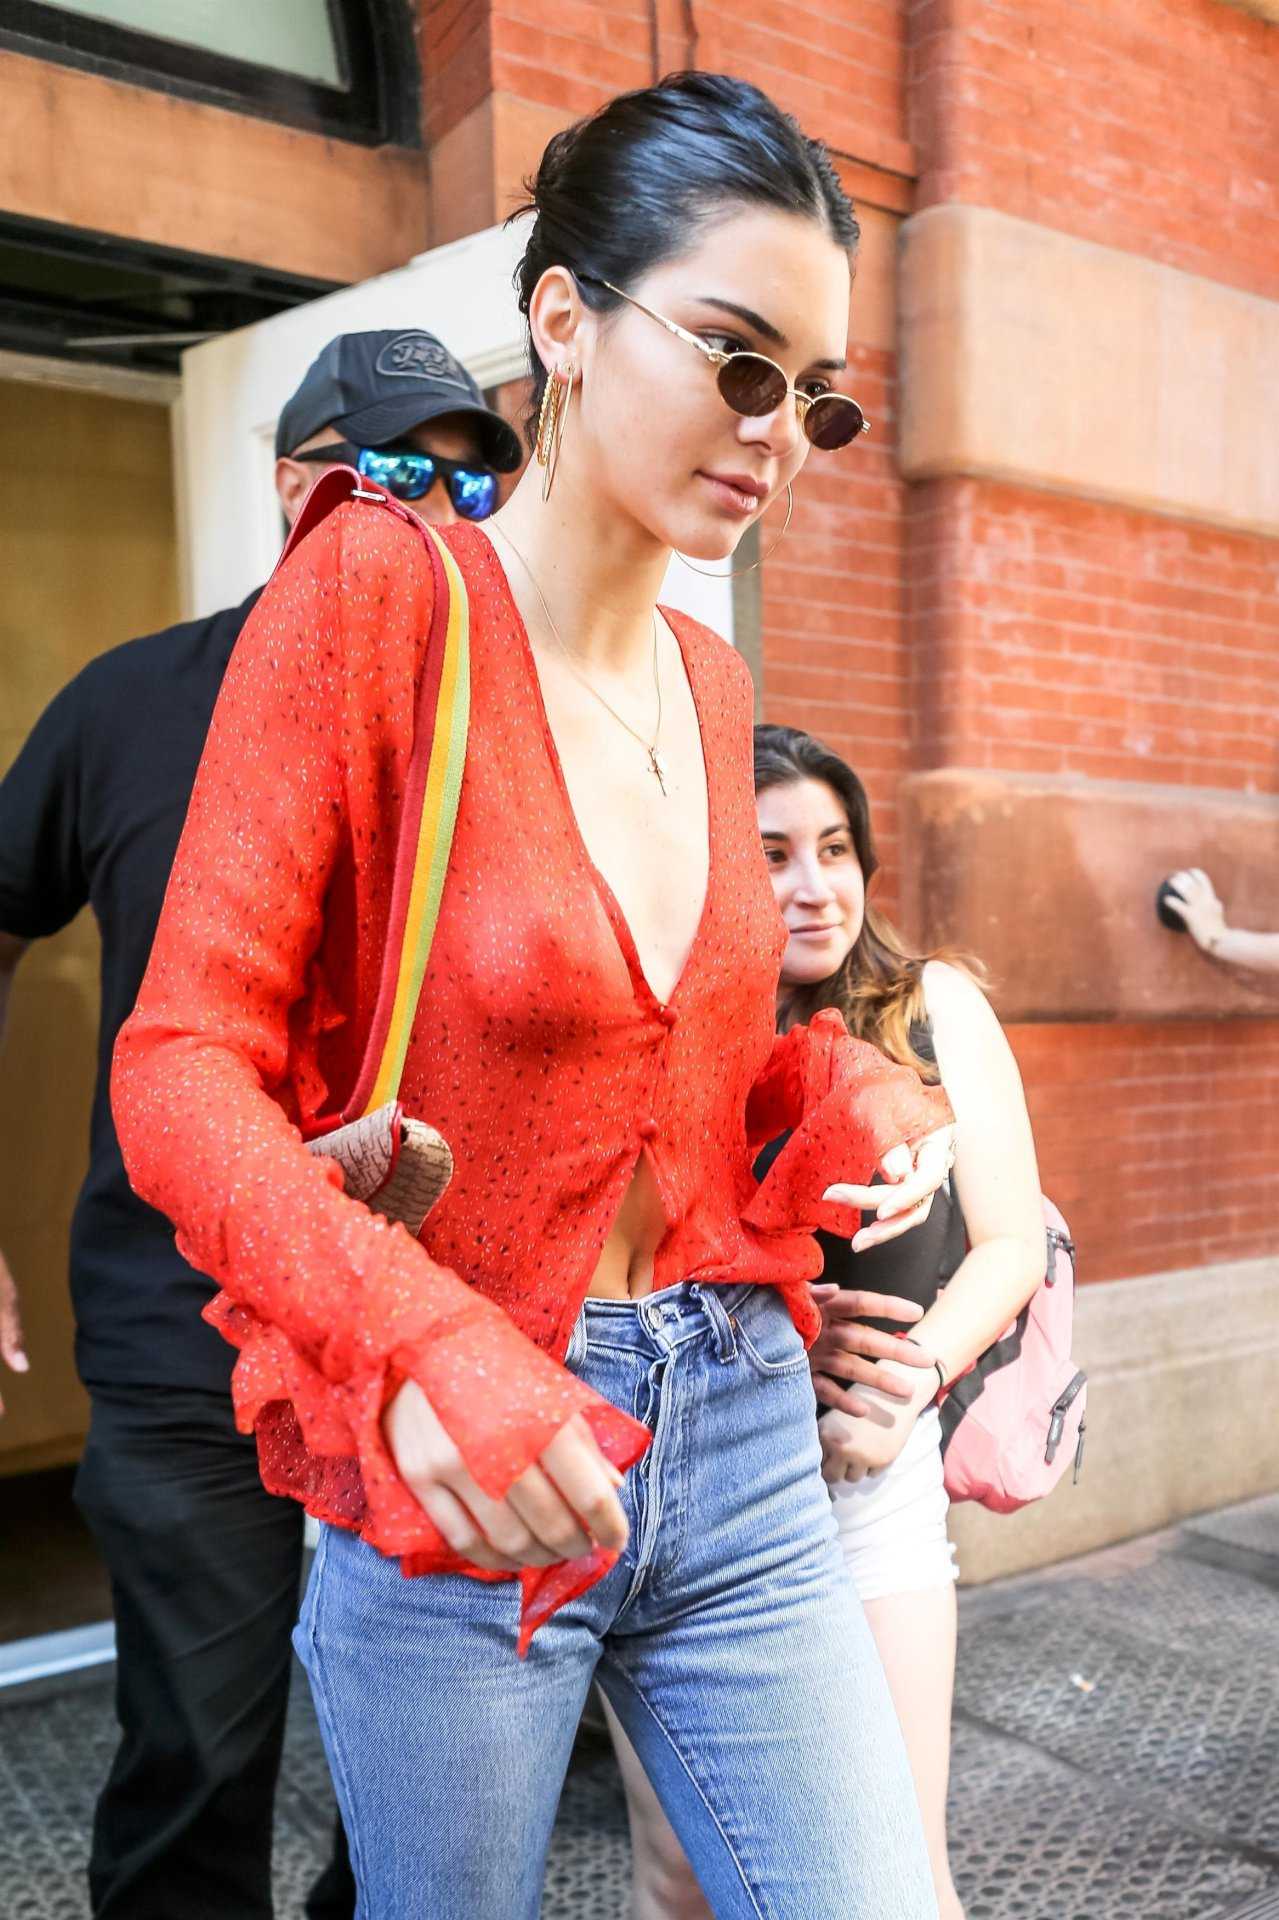 787e1 Kendall Jenner Braless 987 1 - Kendall Jenner Braless See-Through Candids in New York